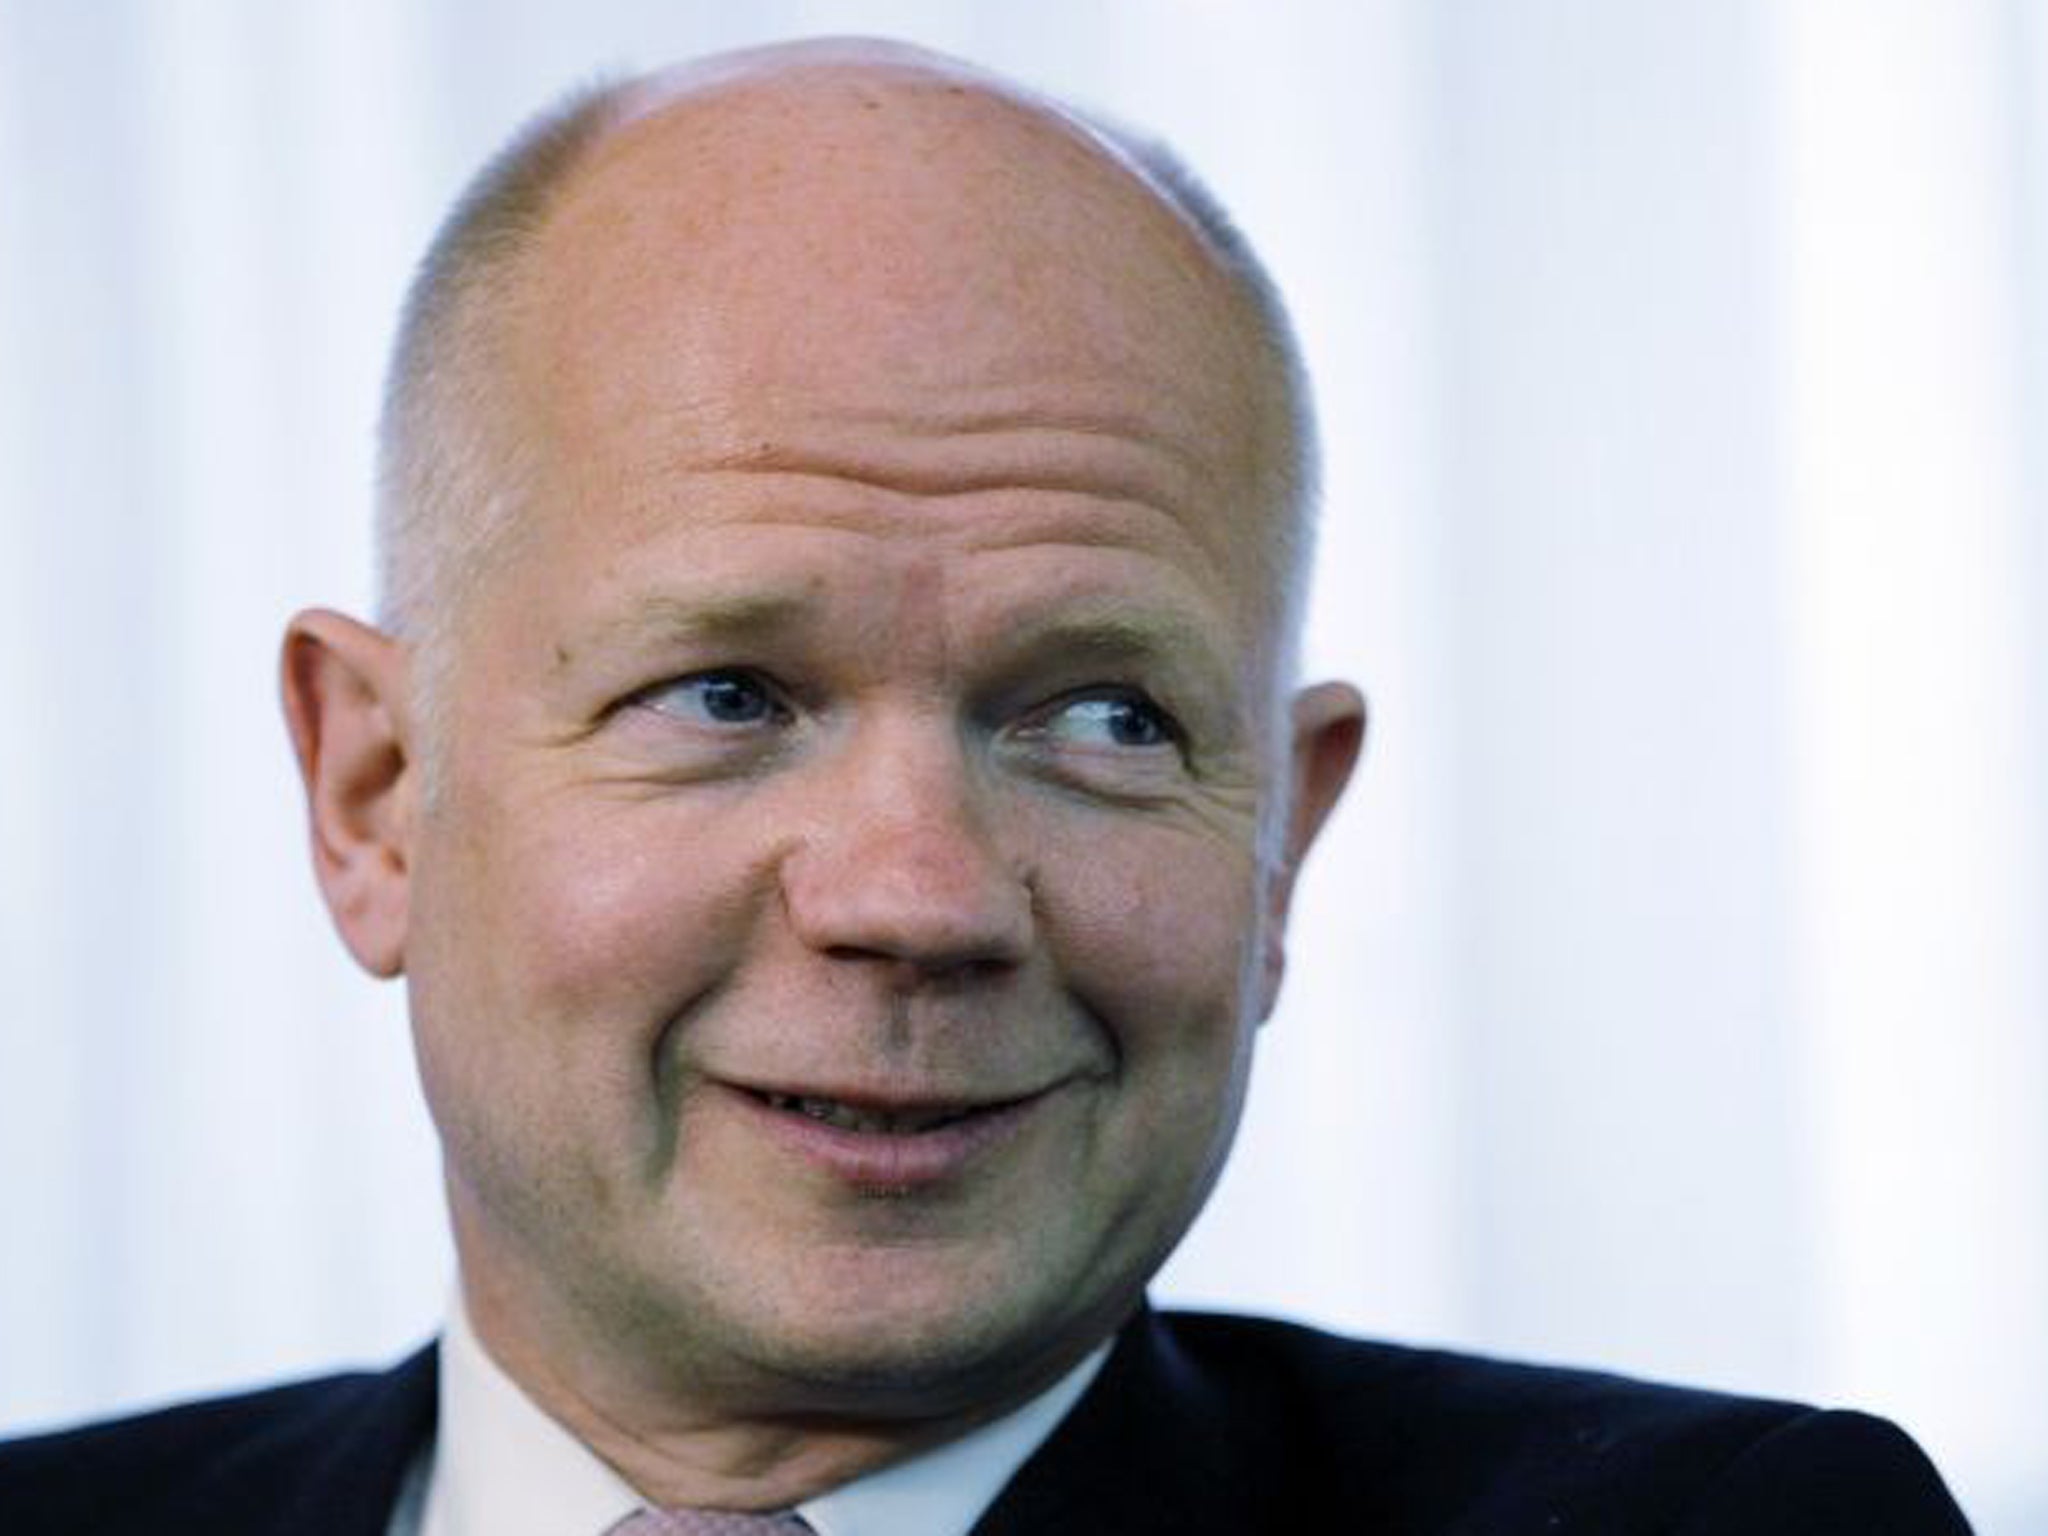 William Hague said the only way of securing a political solution in the Syria conflict was to ensure that moderates opposing Bashar Assad's regime were not destroyed